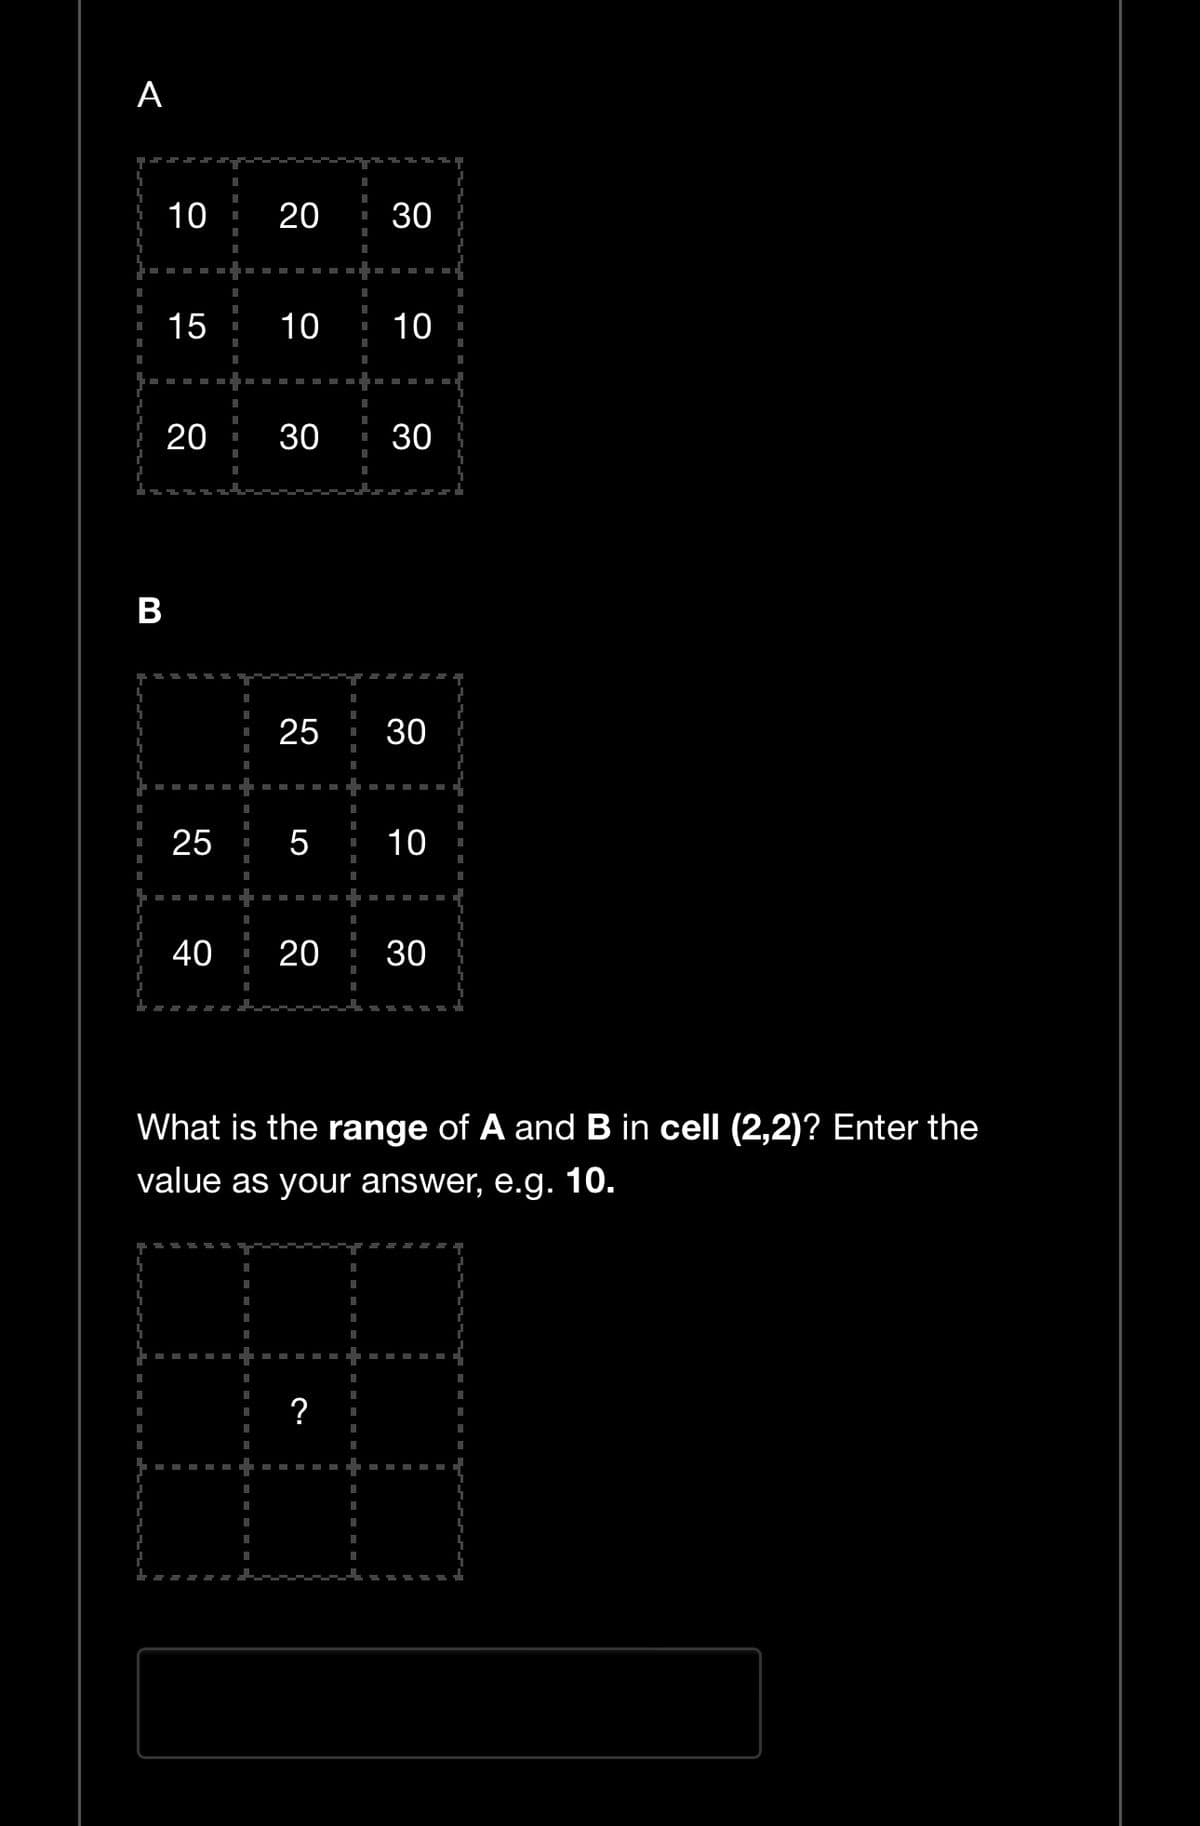 B
A
10
20
0
30
0
15
10 10
20
30
0
5
25
25
I
30
0
0
30
5
10
40
20
30
0
What is the range of A and B in cell (2,2)? Enter the
value as your answer, e.g. 10.
?